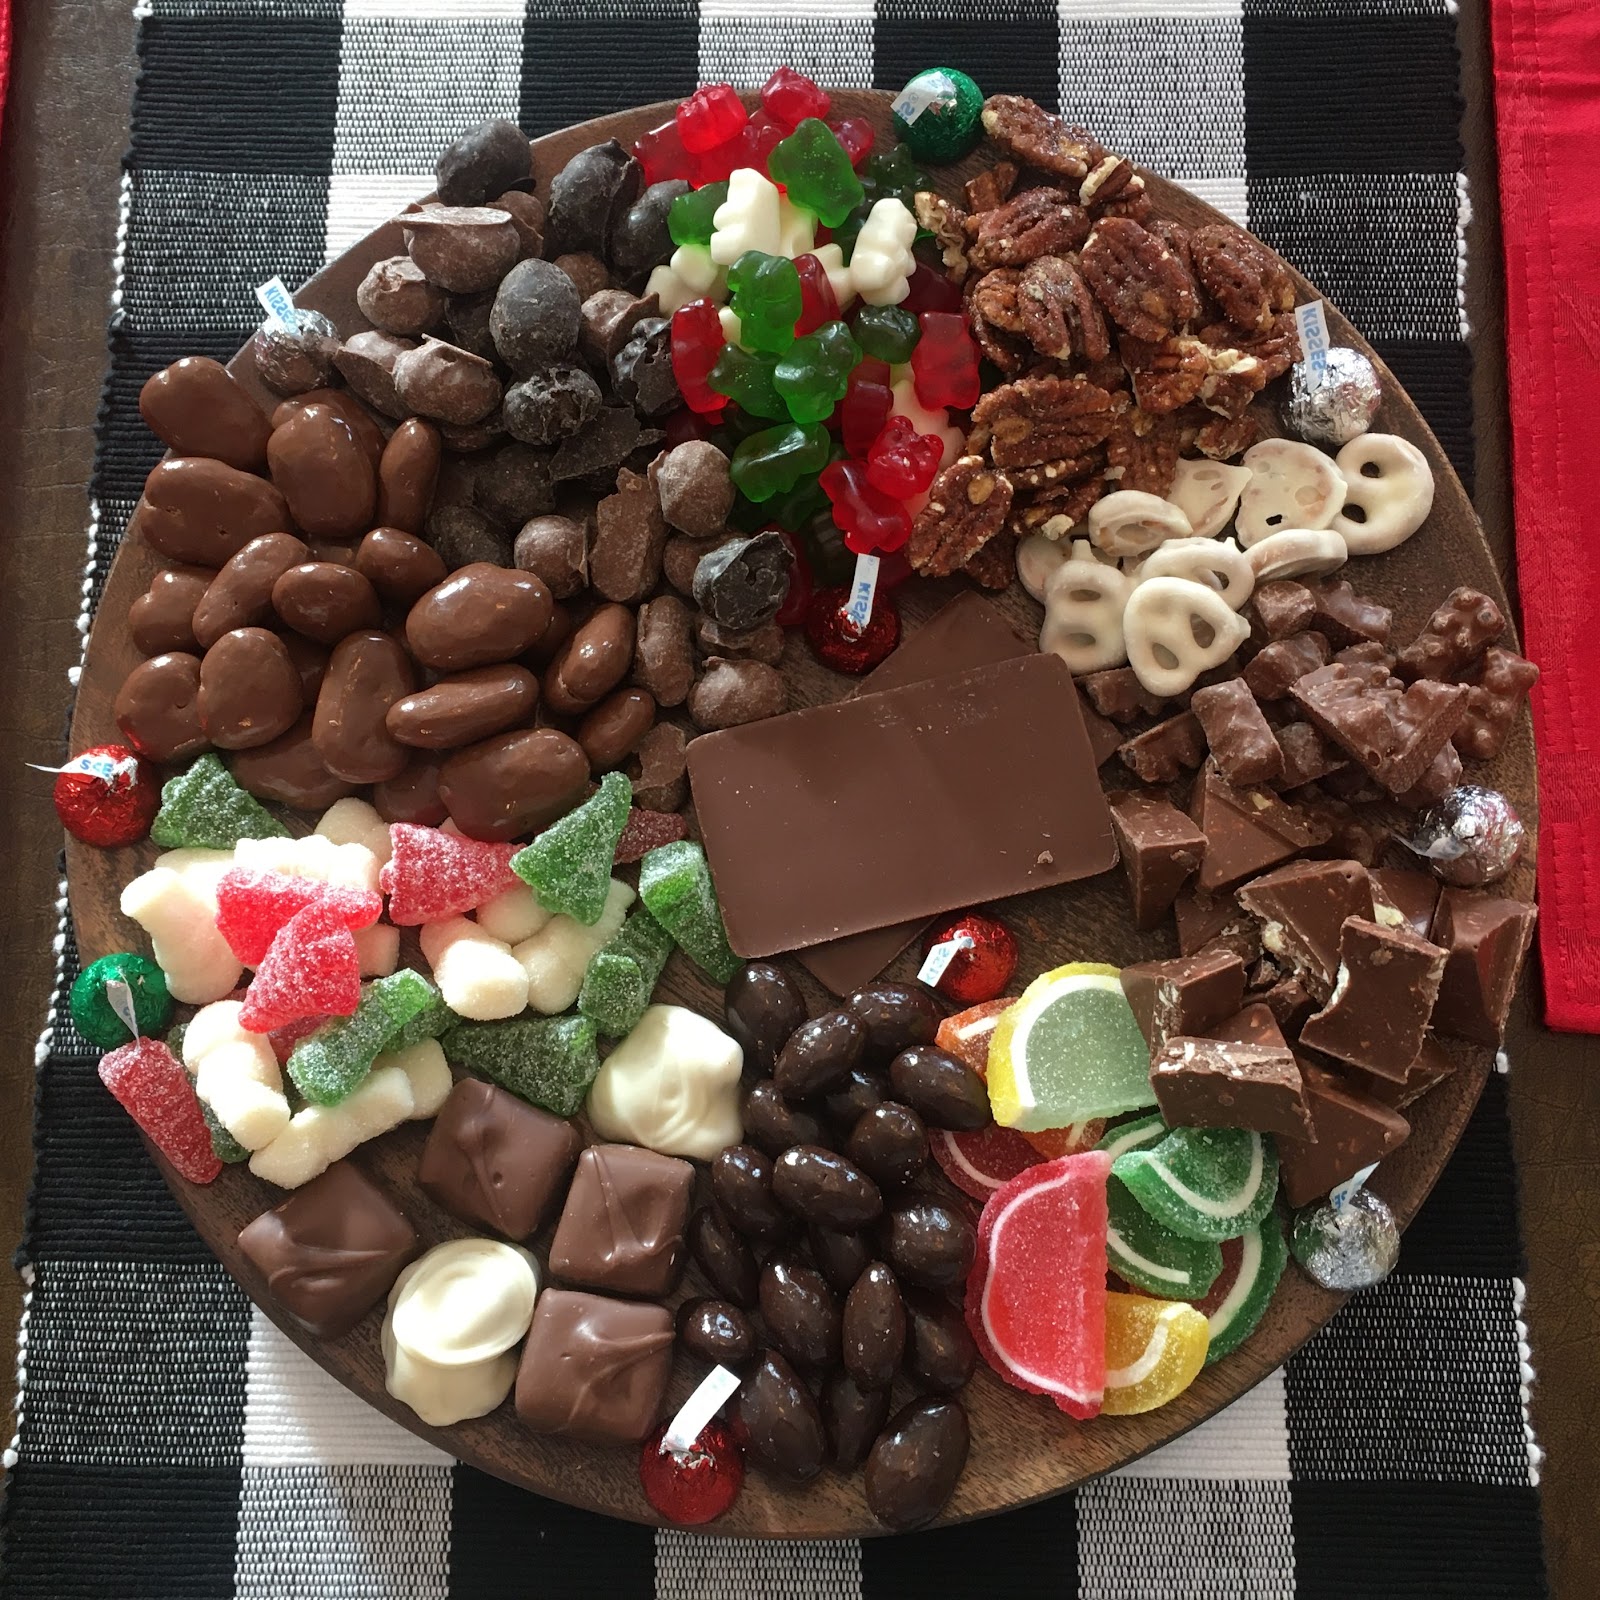 Candy charcuterie board